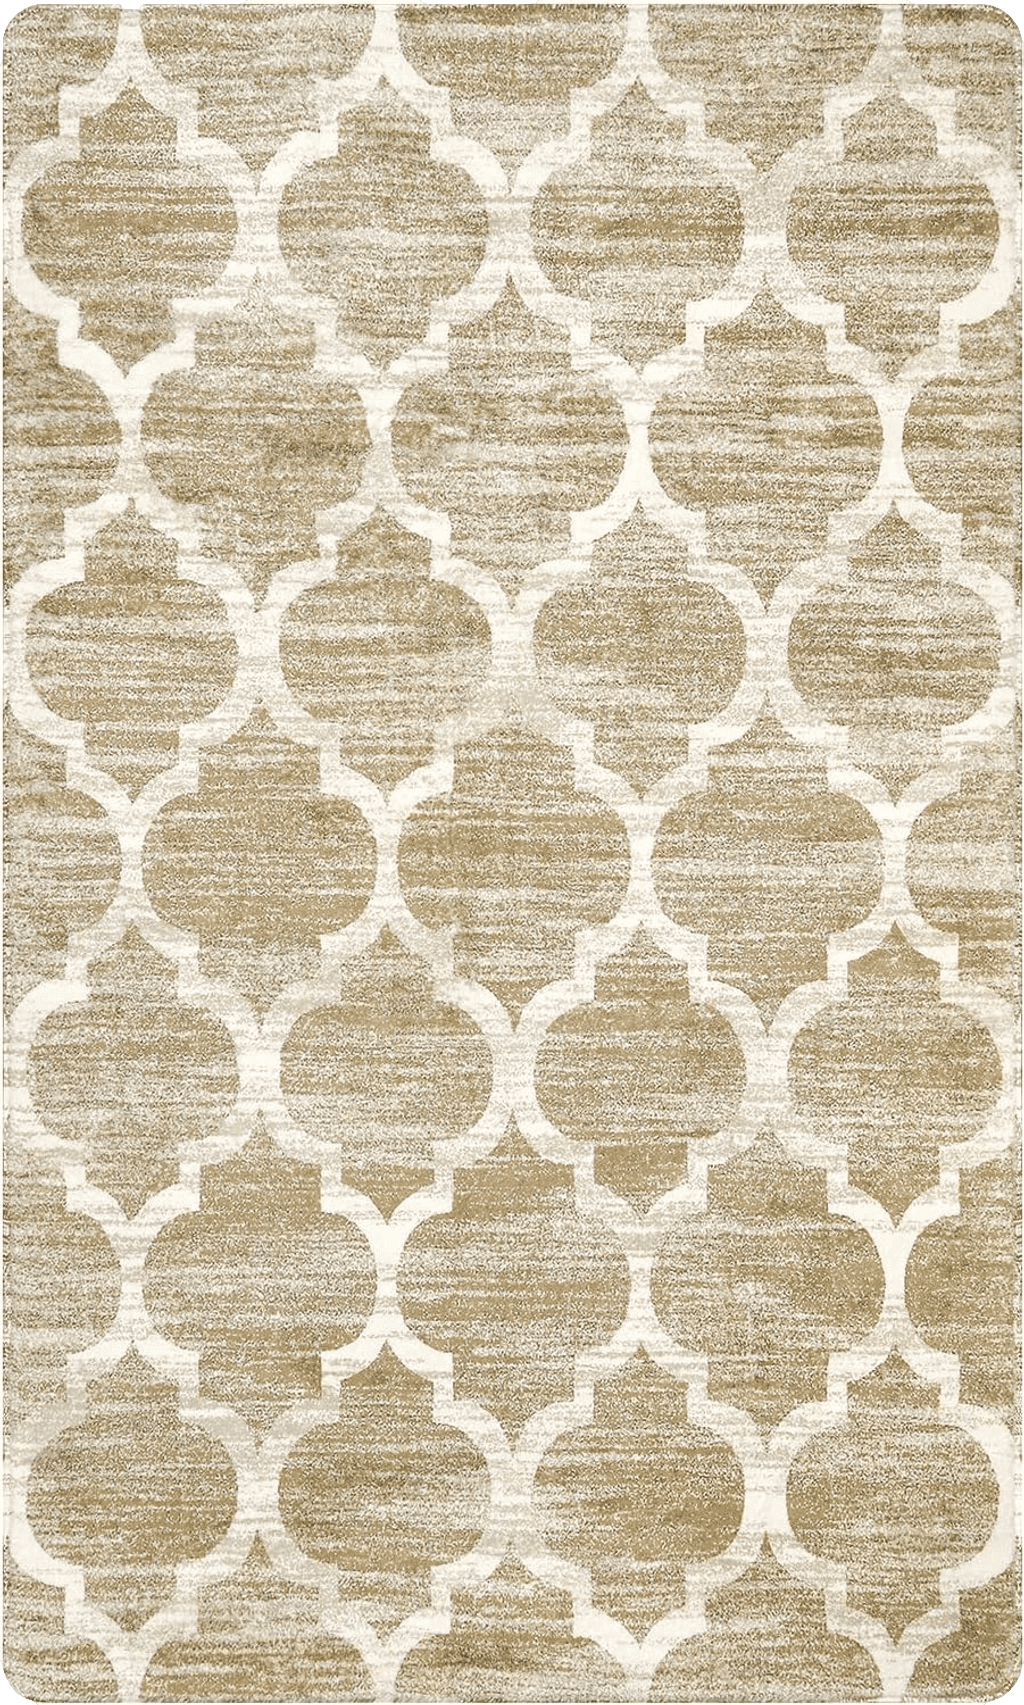 Lahome Moroccan Washable Living Room Carpet - 3x5 Area Rugs for Bedroom Aesthetic Non-Slip Throw Office Kitchen Rug Taupe Print Distressed Indoor Floor Carpet for Bathroom Laundry Room Dining Room